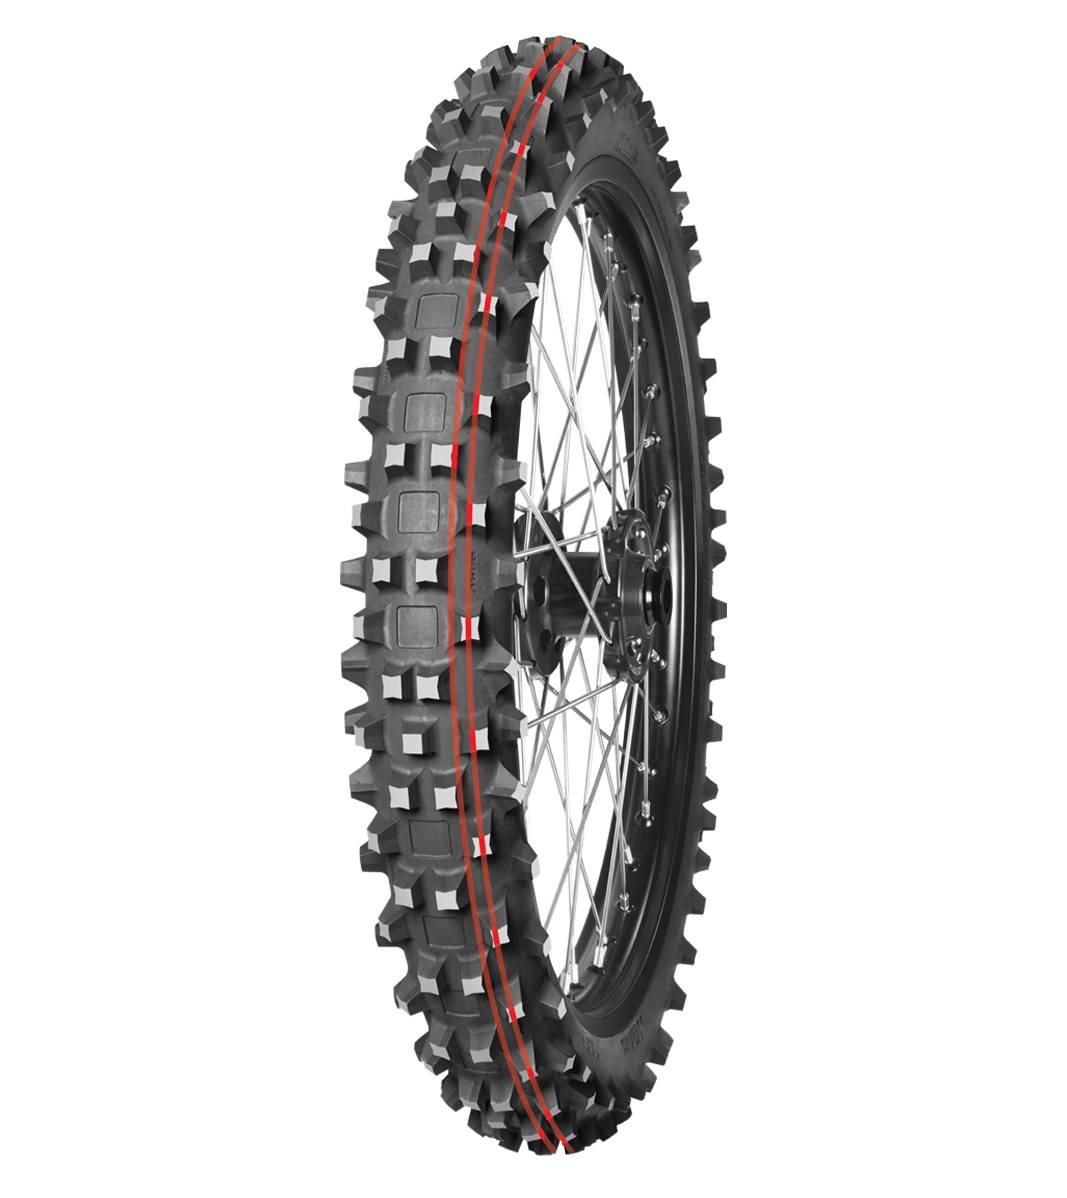 Mitas TERRA FORCE-MX Sand 80/100-21 Motocross Competition Off-Road Sand 51M 2 Red Tube Front Tire, 226719, 80/100-21, Front, Motocross, Motocross Competition, Off-Road, Terra Force, Terra Force-MX Sand, Trail, Tires - Imported and distributed in North &amp; South America by Lindeco Genuine Powersports - Premier Powersports Equipment and Accessories for Motorcycle Enthusiasts, Professional Riders and Dealers.